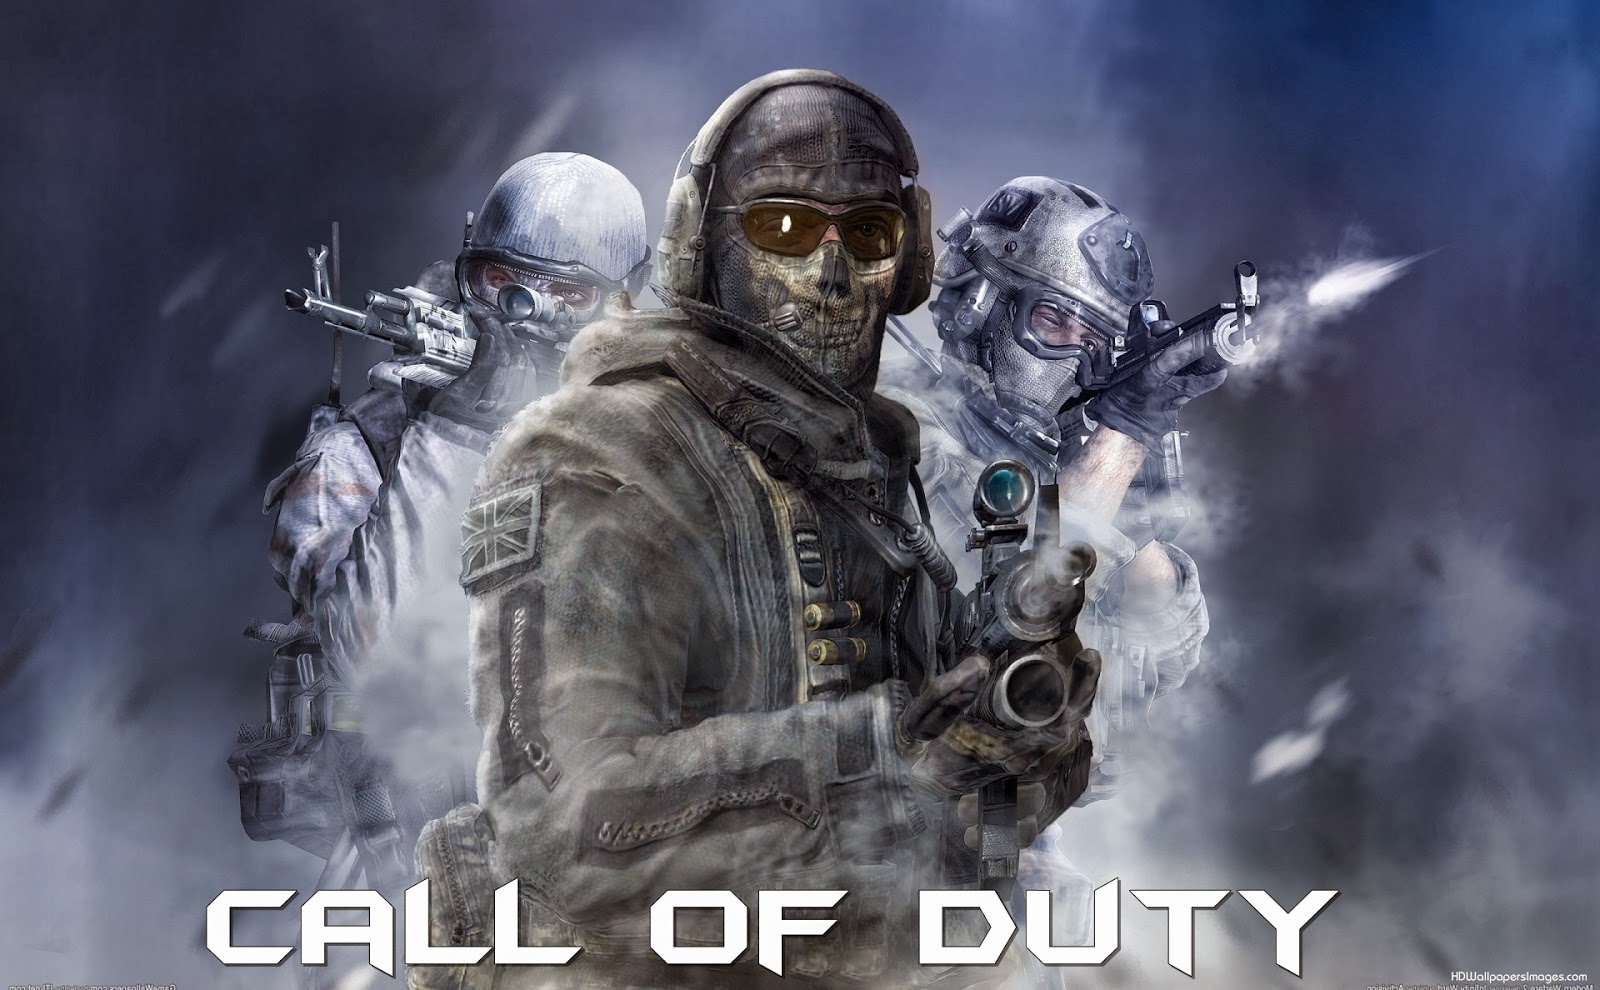 Call of Duty Ghost: Free Download PC Game Full Version + Crack | Blog ...